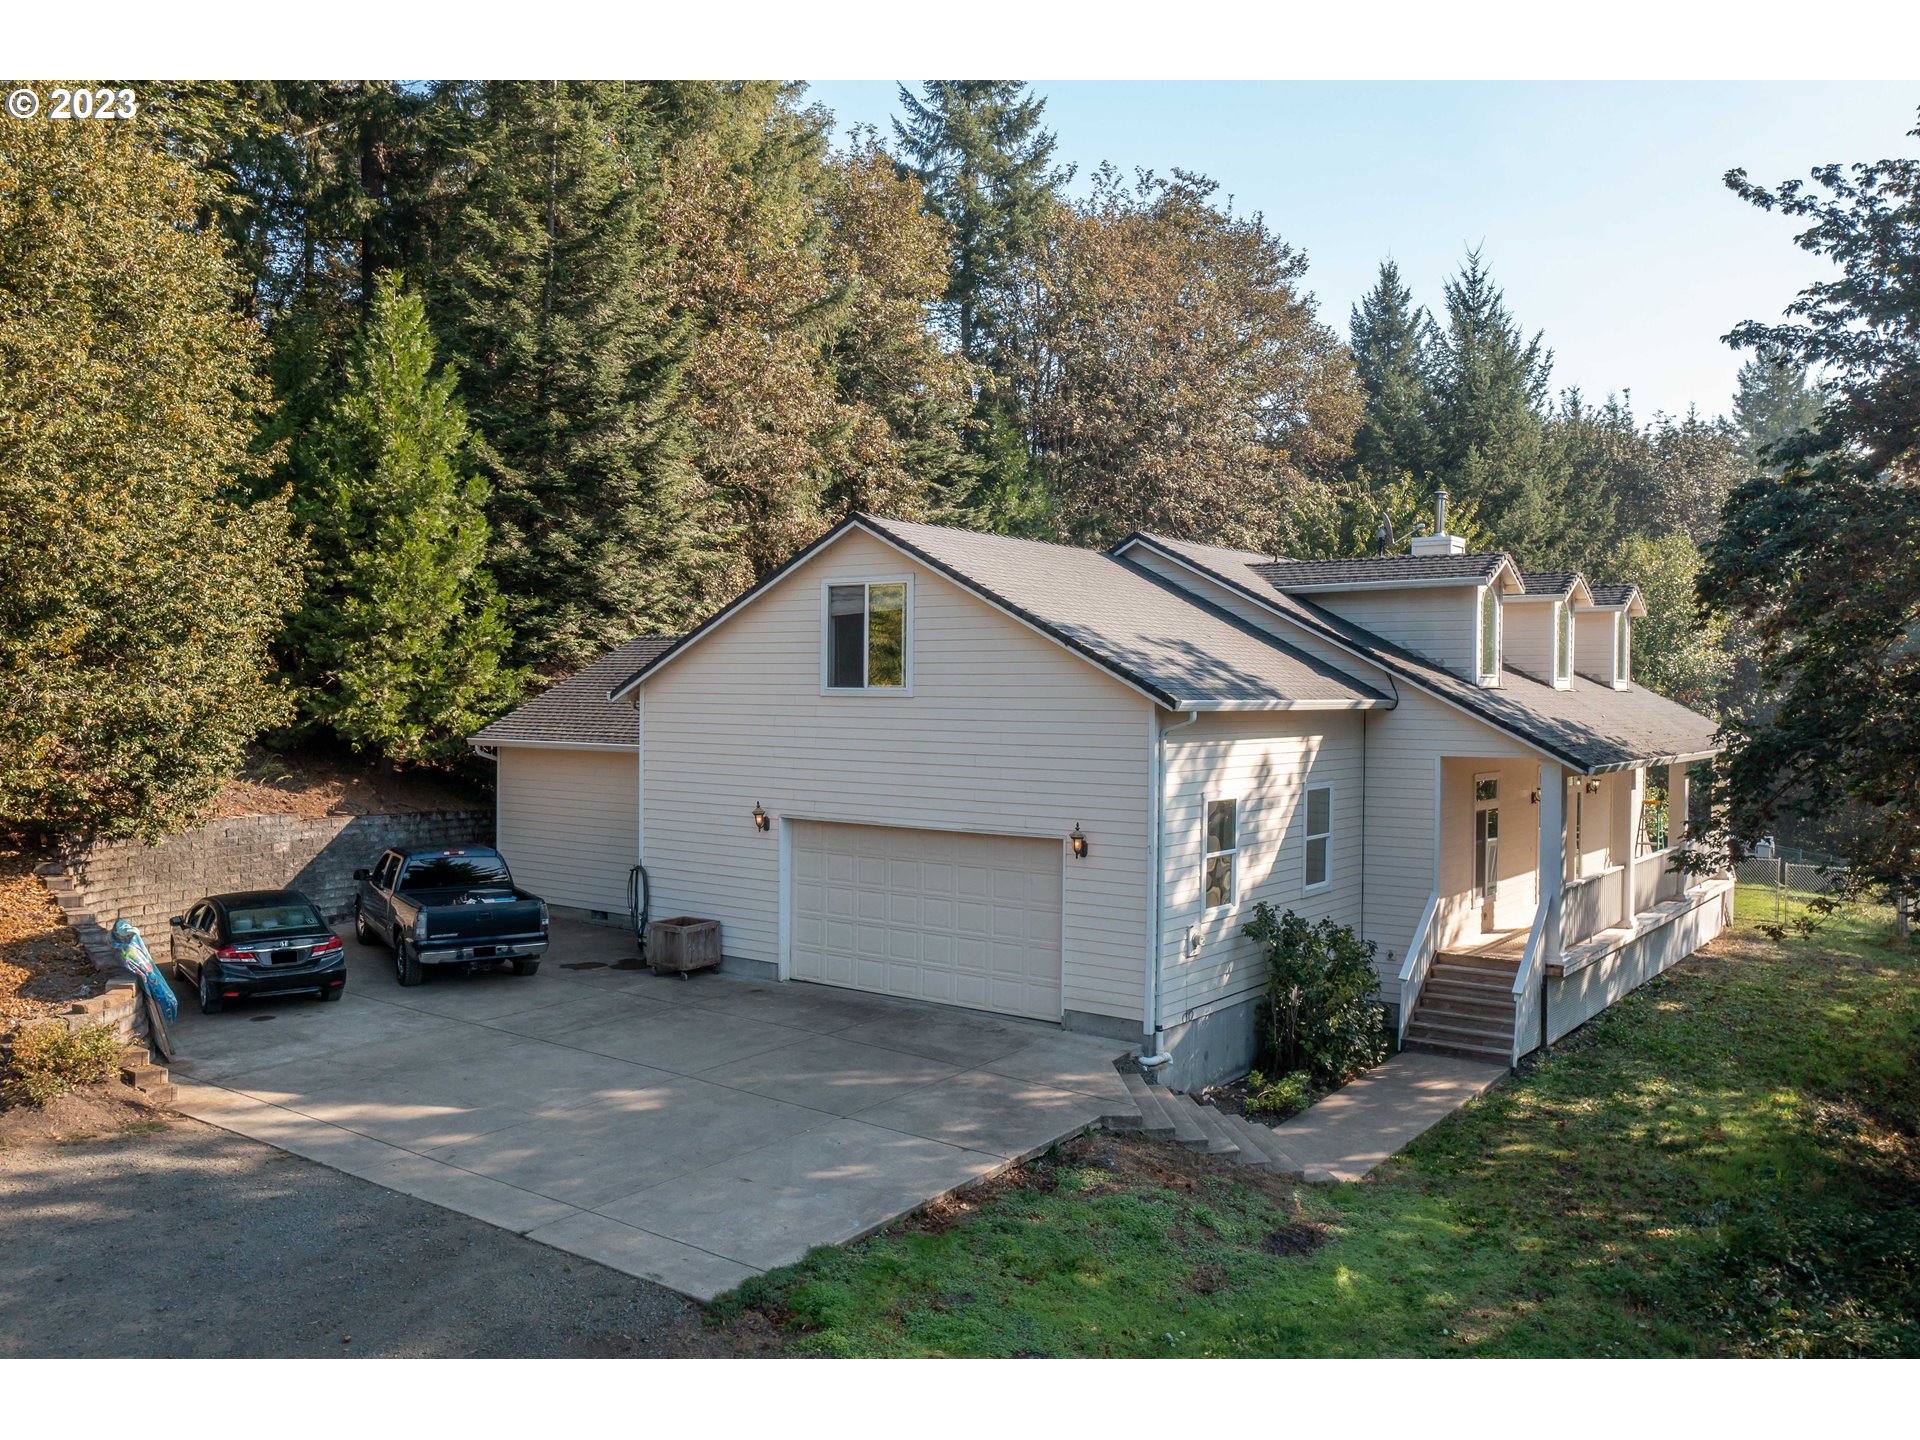 37549 WALLACE CREEK RD, Springfield, OR 97478